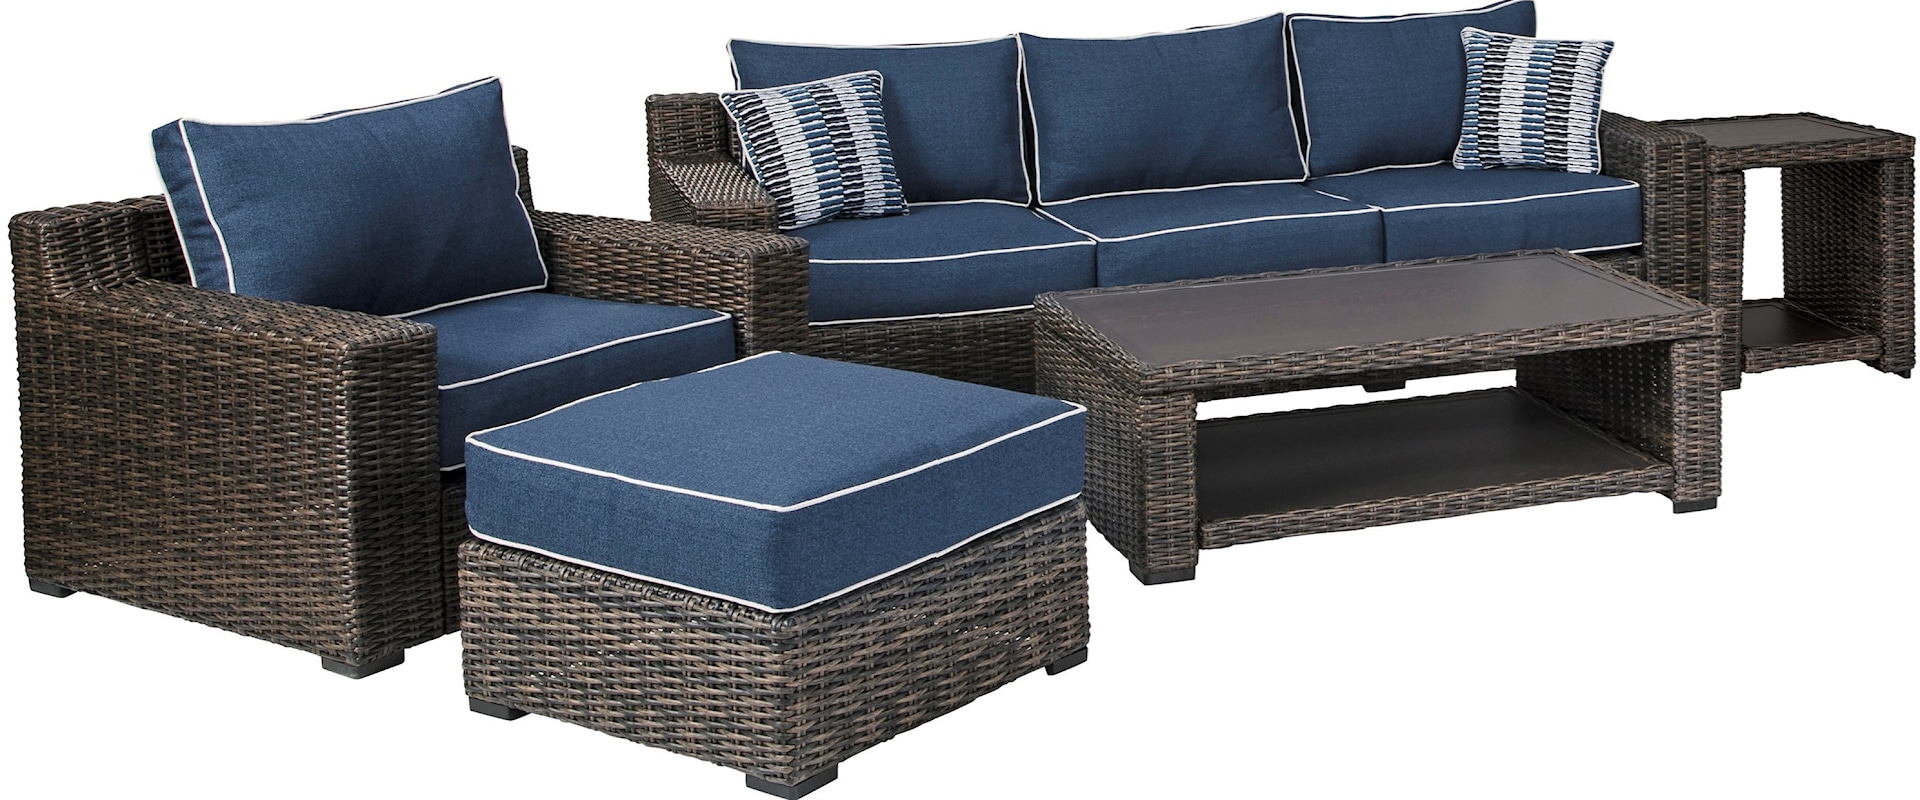 5 Pc. Outdoor Seating Group